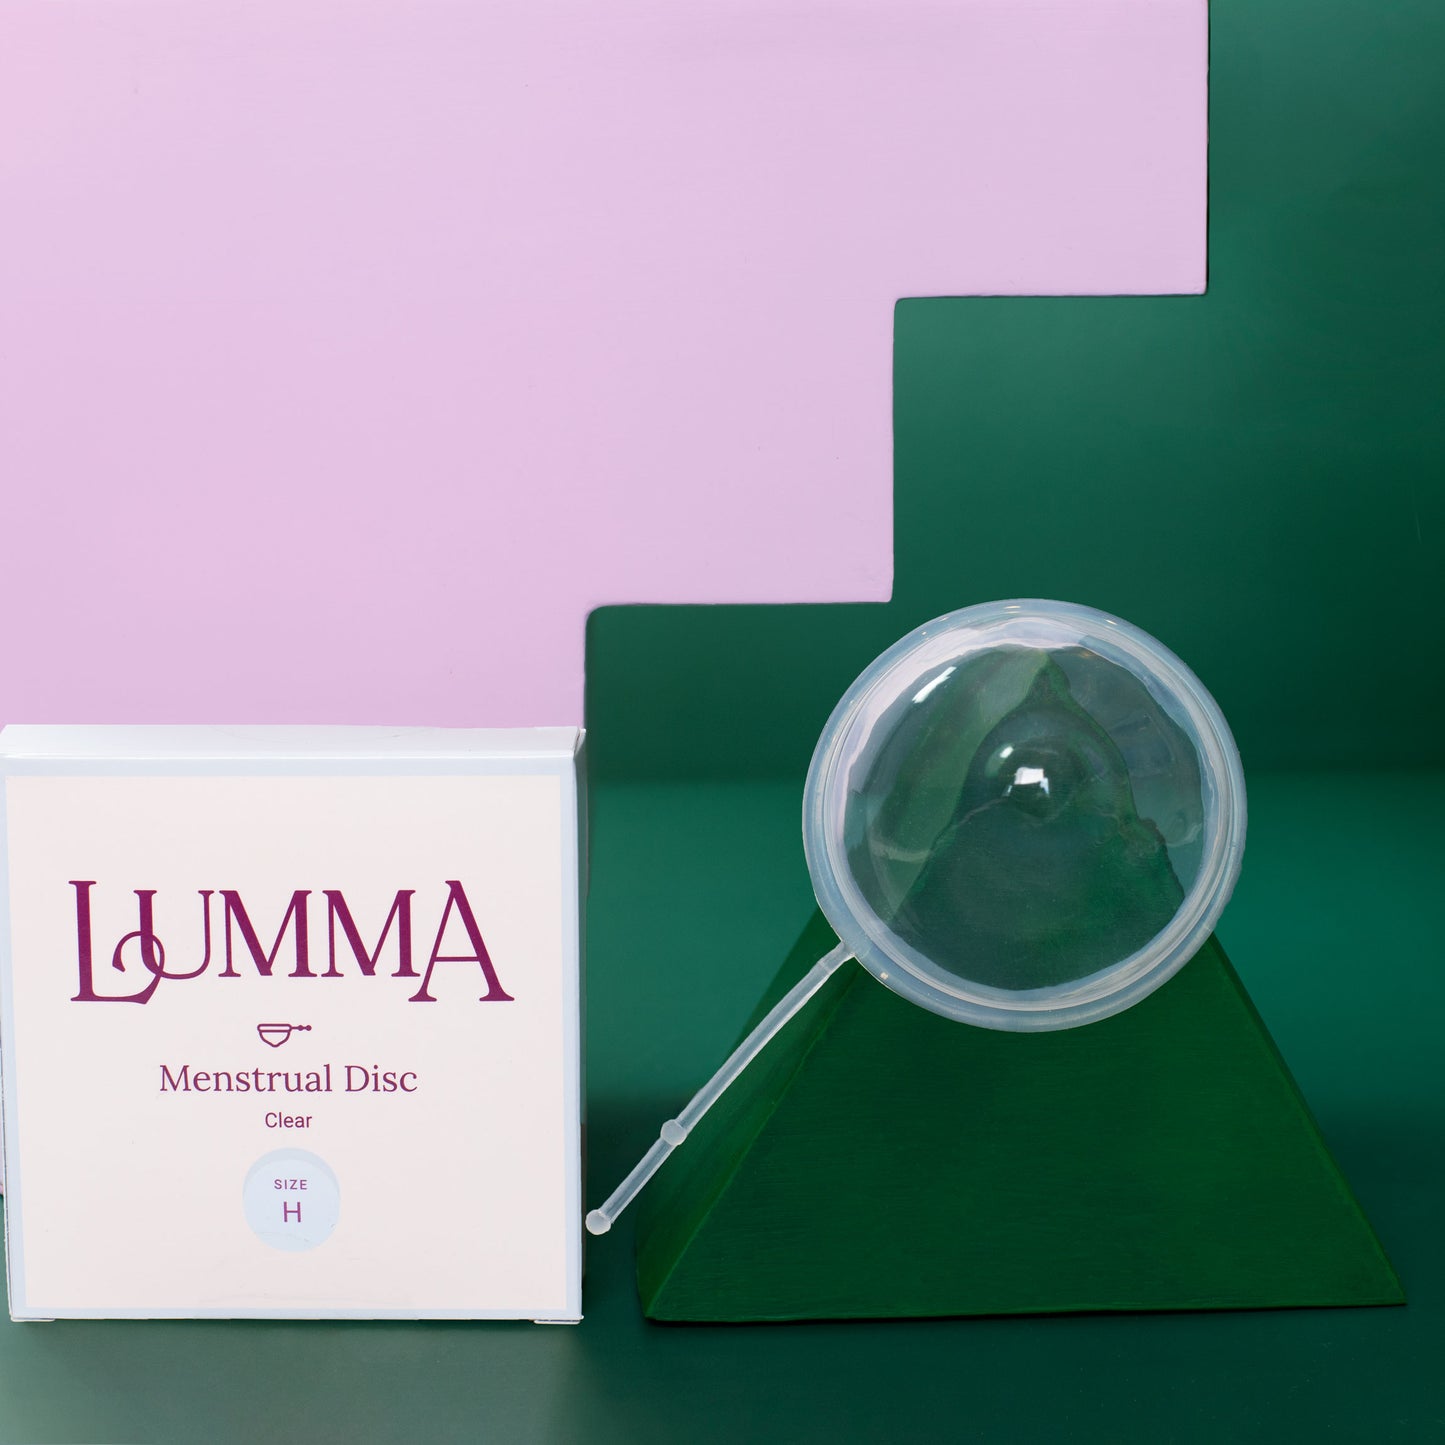 Lumma menstrual disc size Large High in clear with packaging